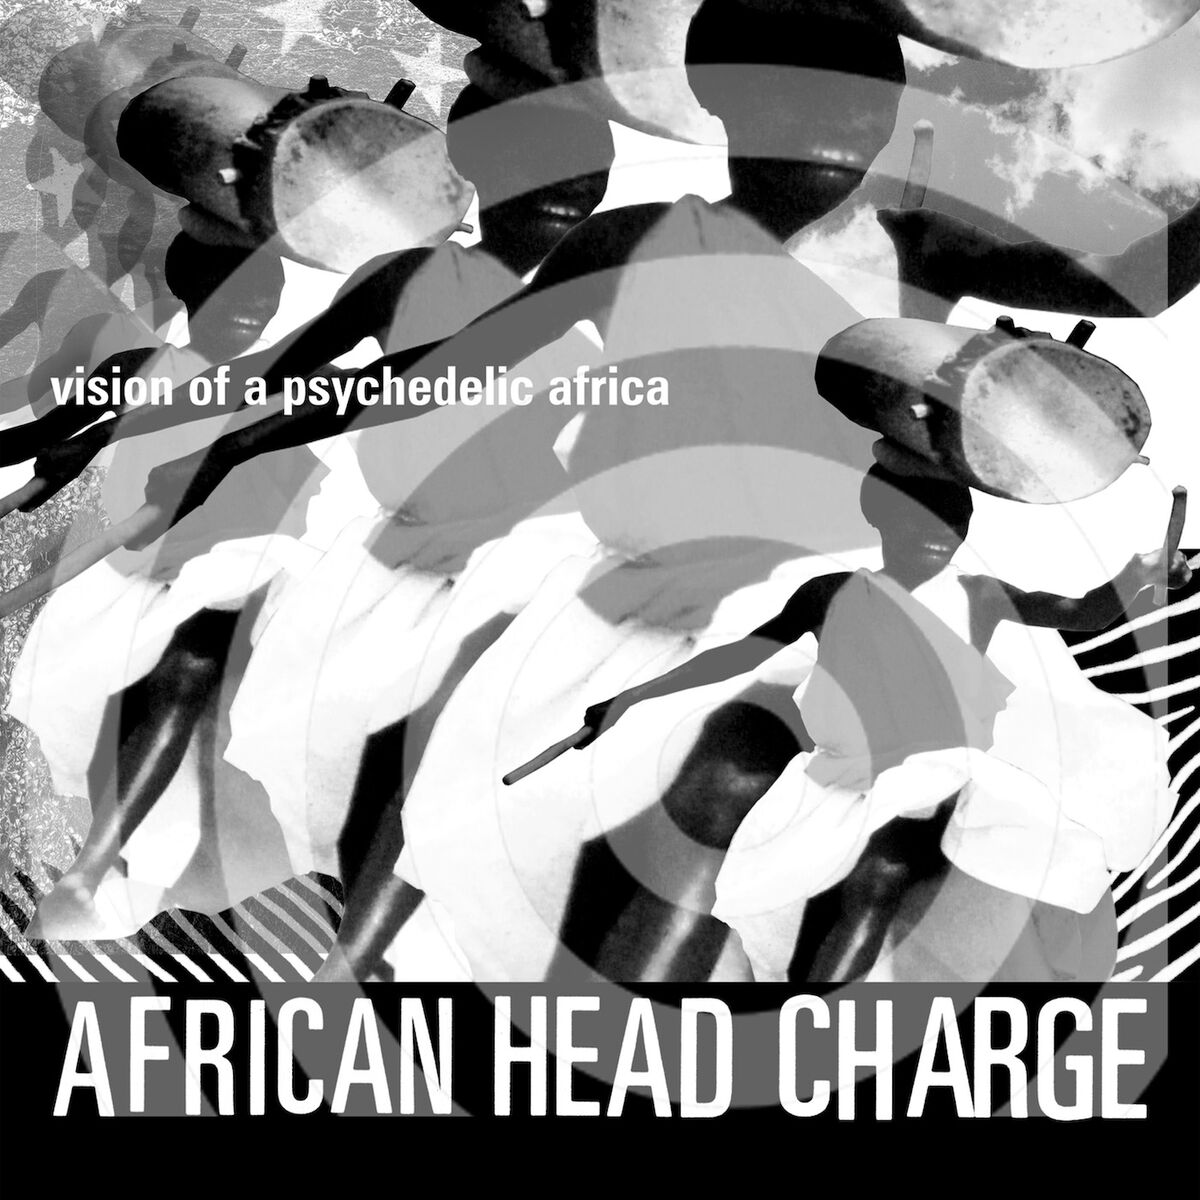 African Head Charge: albums, songs, playlists | Listen on Deezer